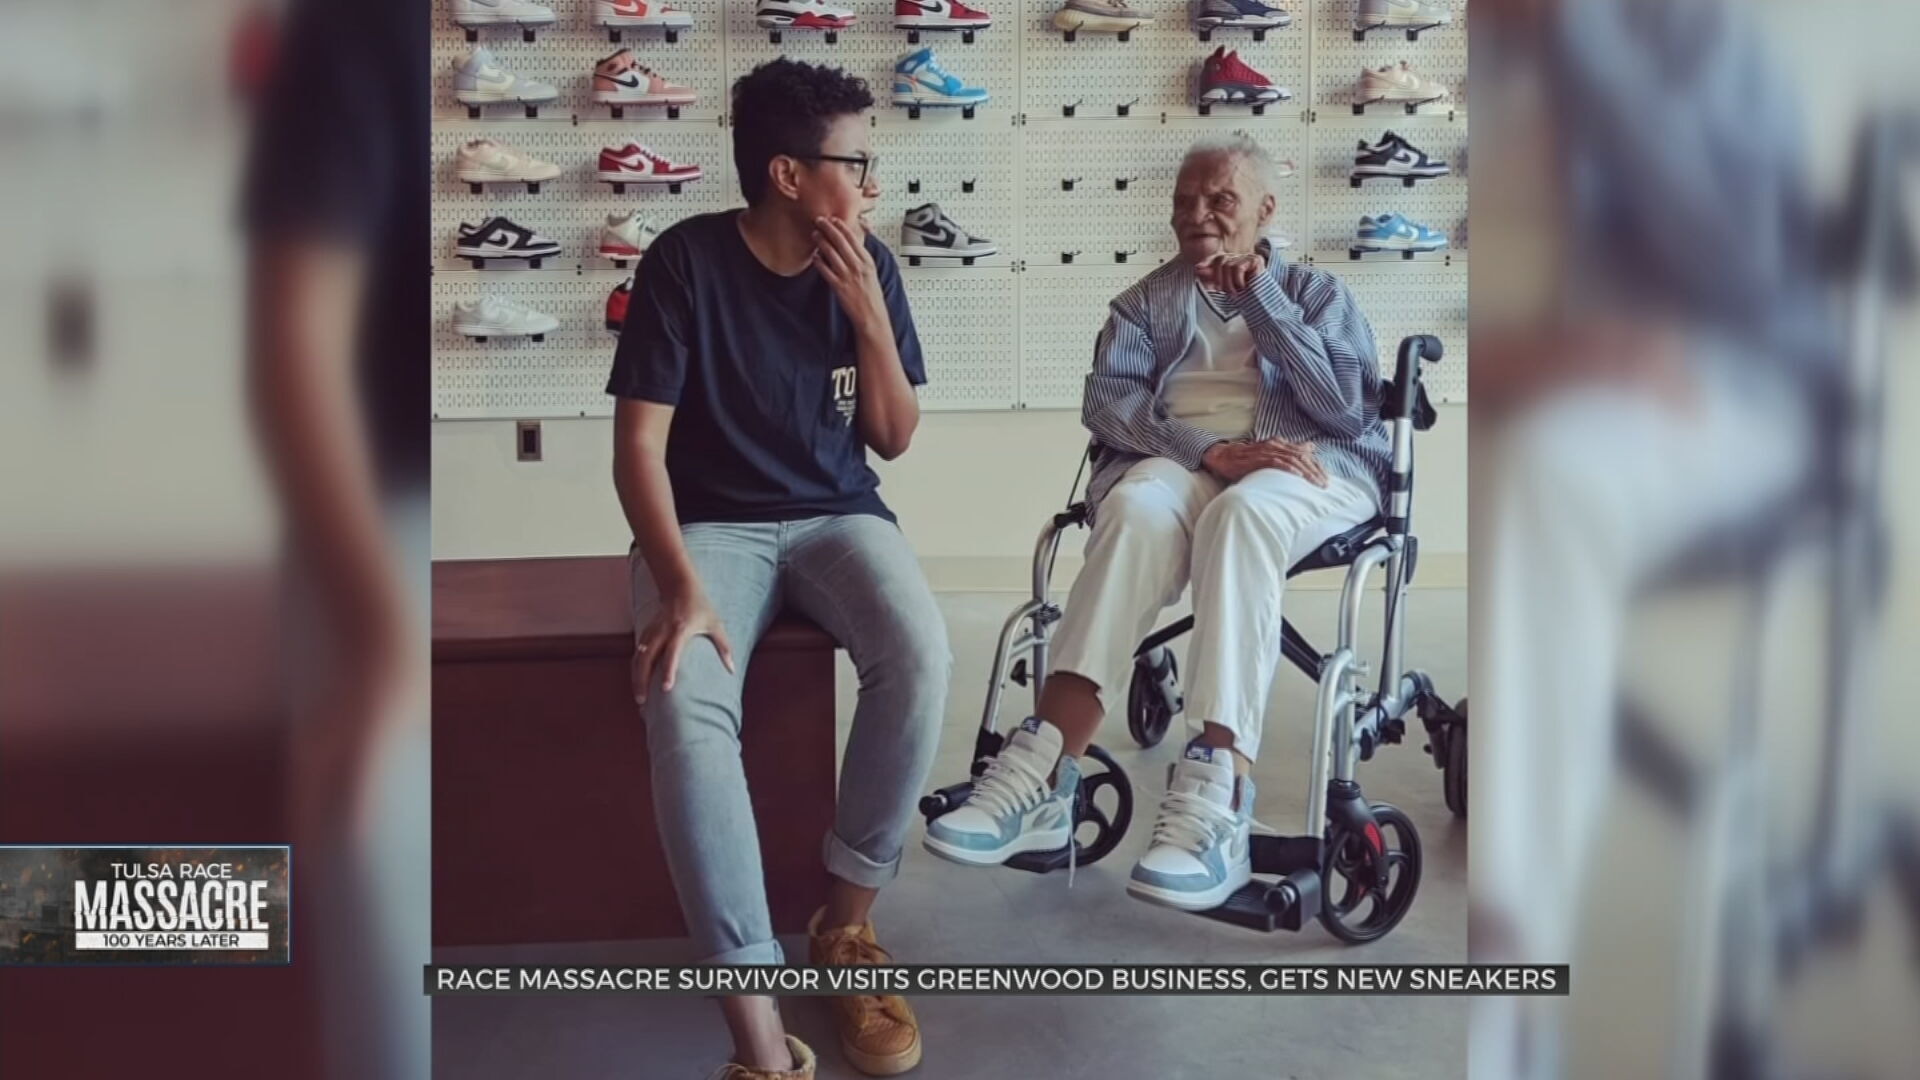 107-Year-Old Race Massacre Survivor Sporting New Jordans Thanks To Silhouette Sneakers